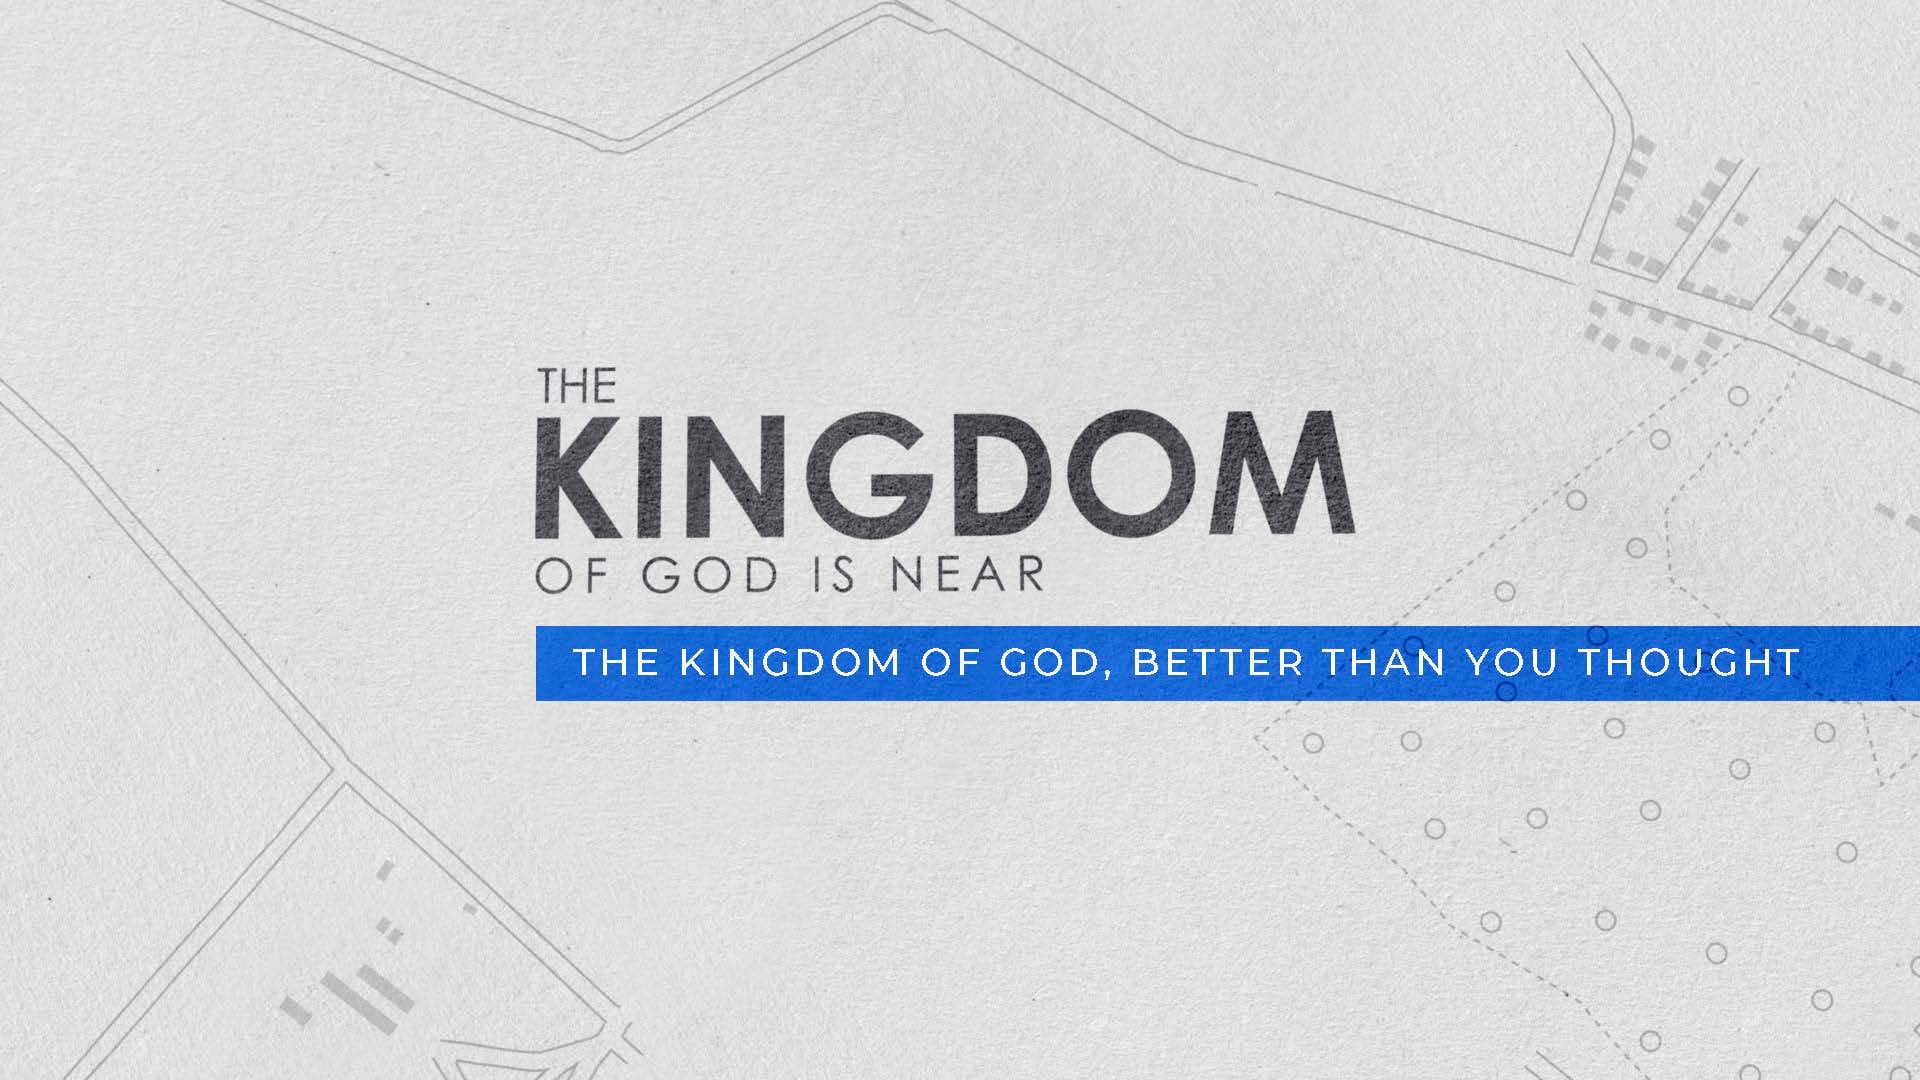 The Kingdom of God, Better Than You Thought